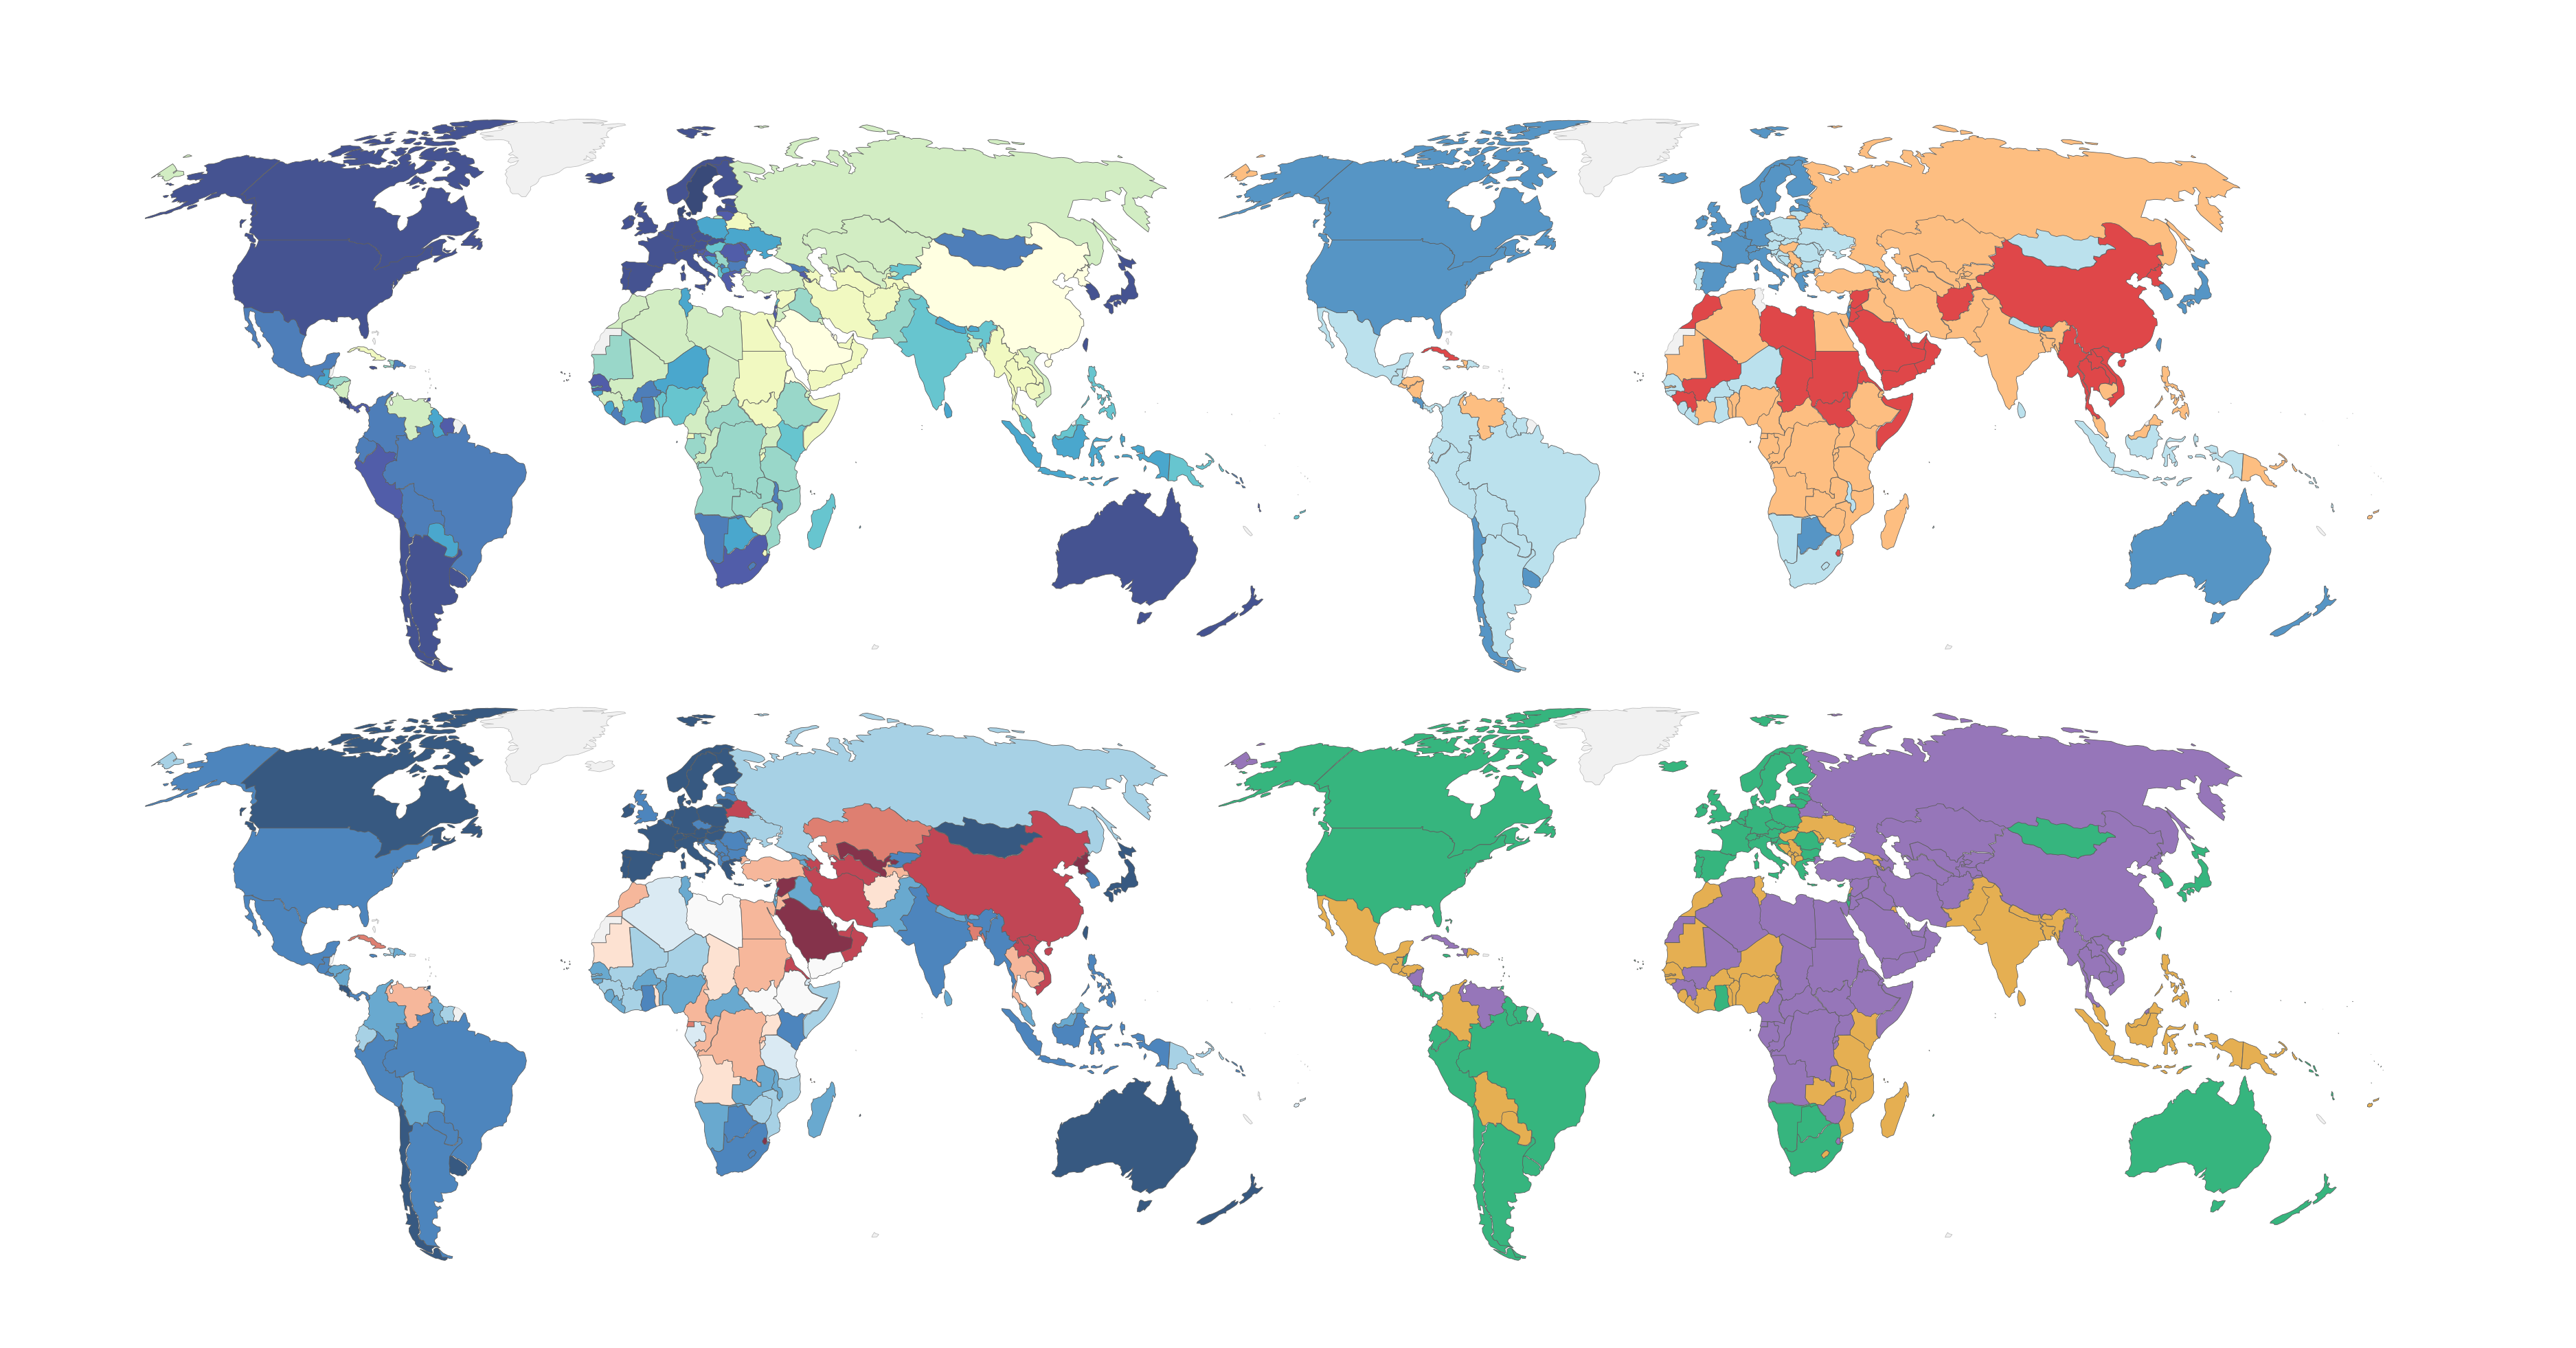 Featured image for article on how researchers measure democracy. Four stylized world maps in different colors, reflecting varying data sources.